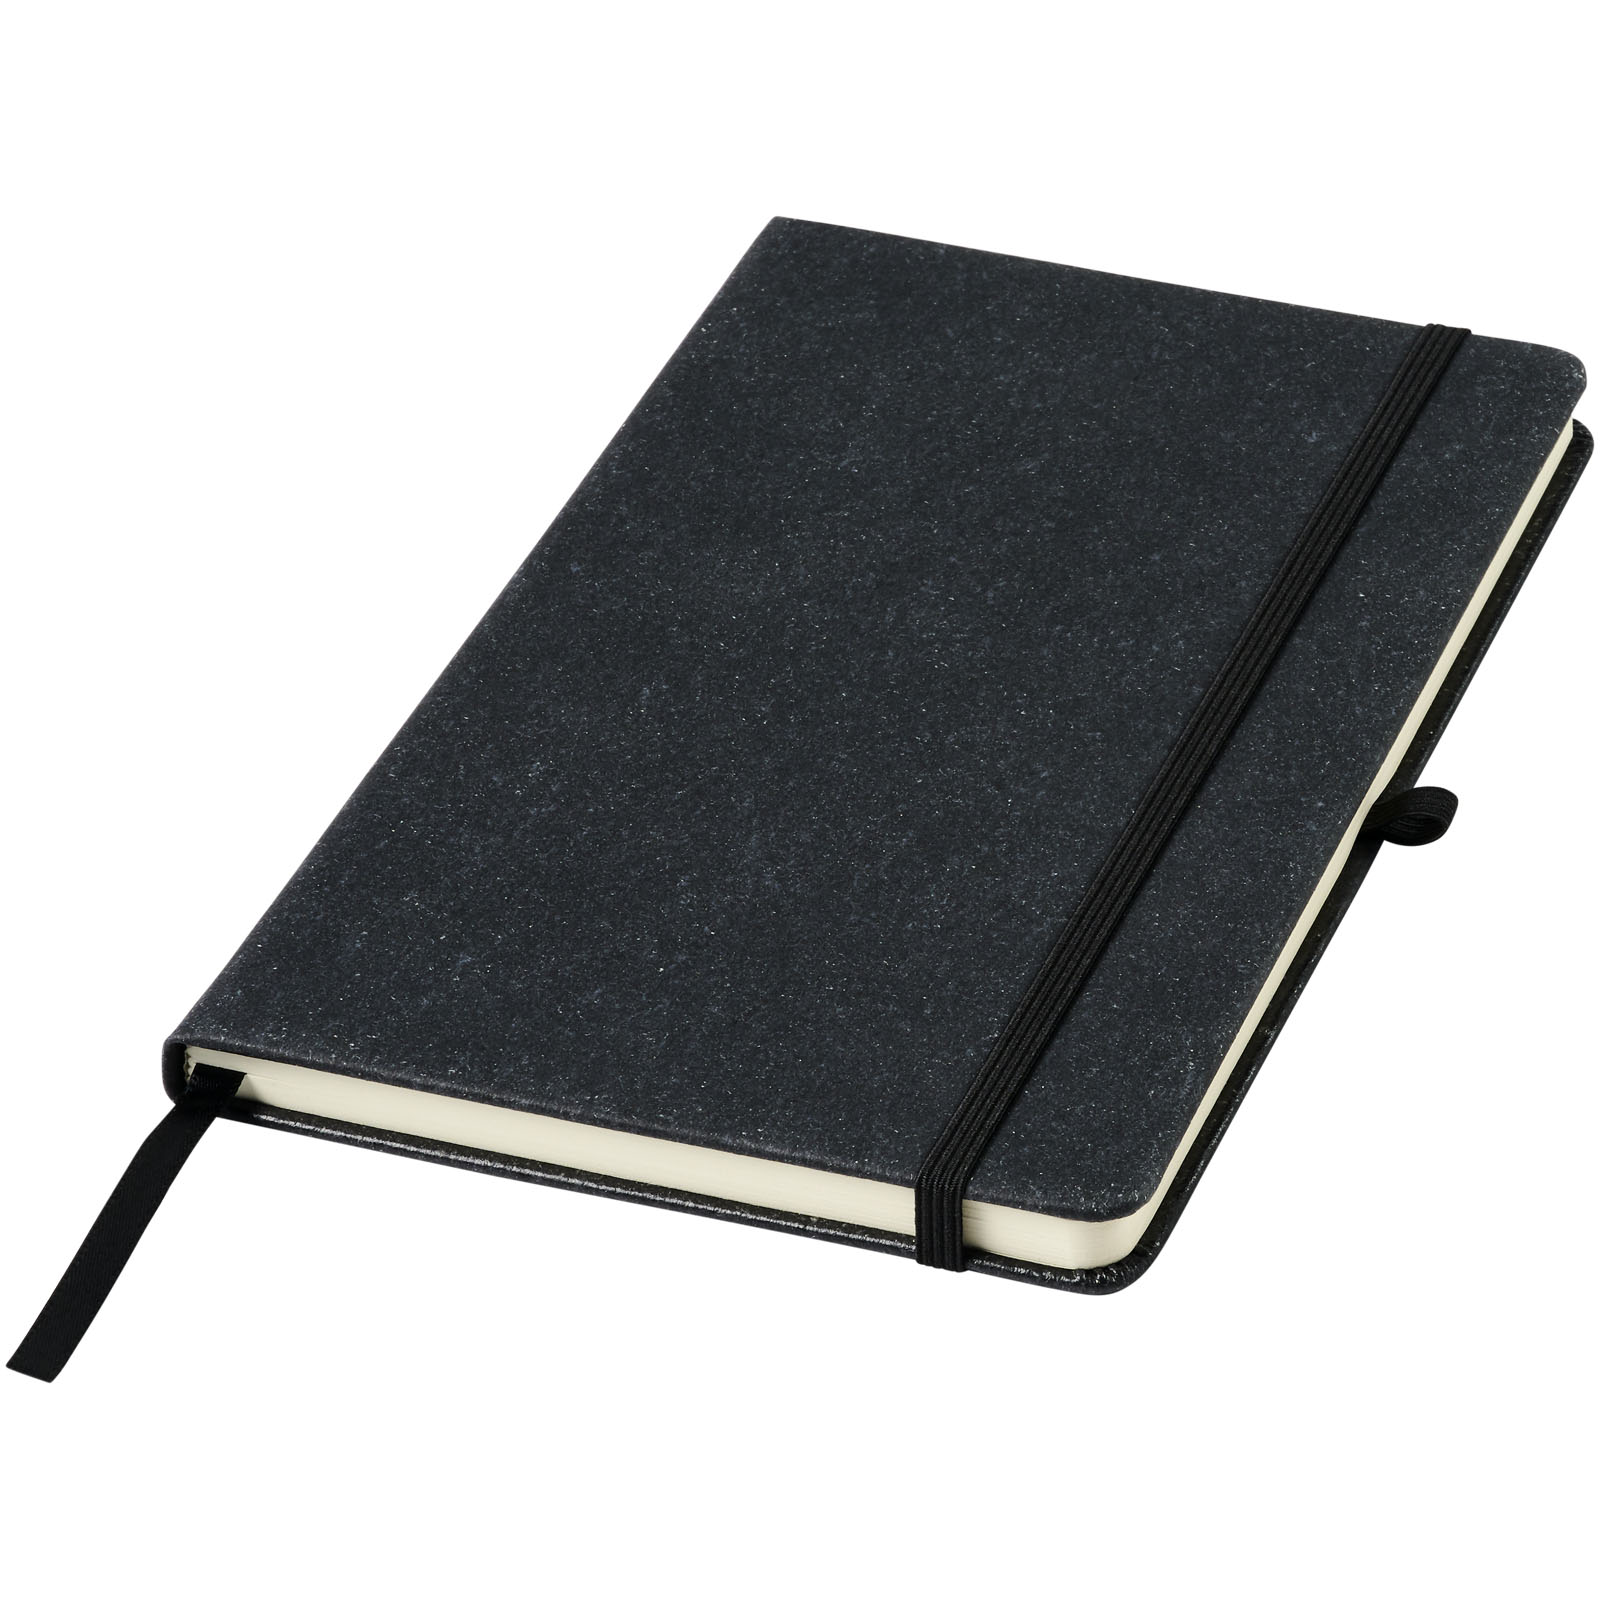 Advertising Hard cover notebooks - Atlana leather pieces notebook - 0